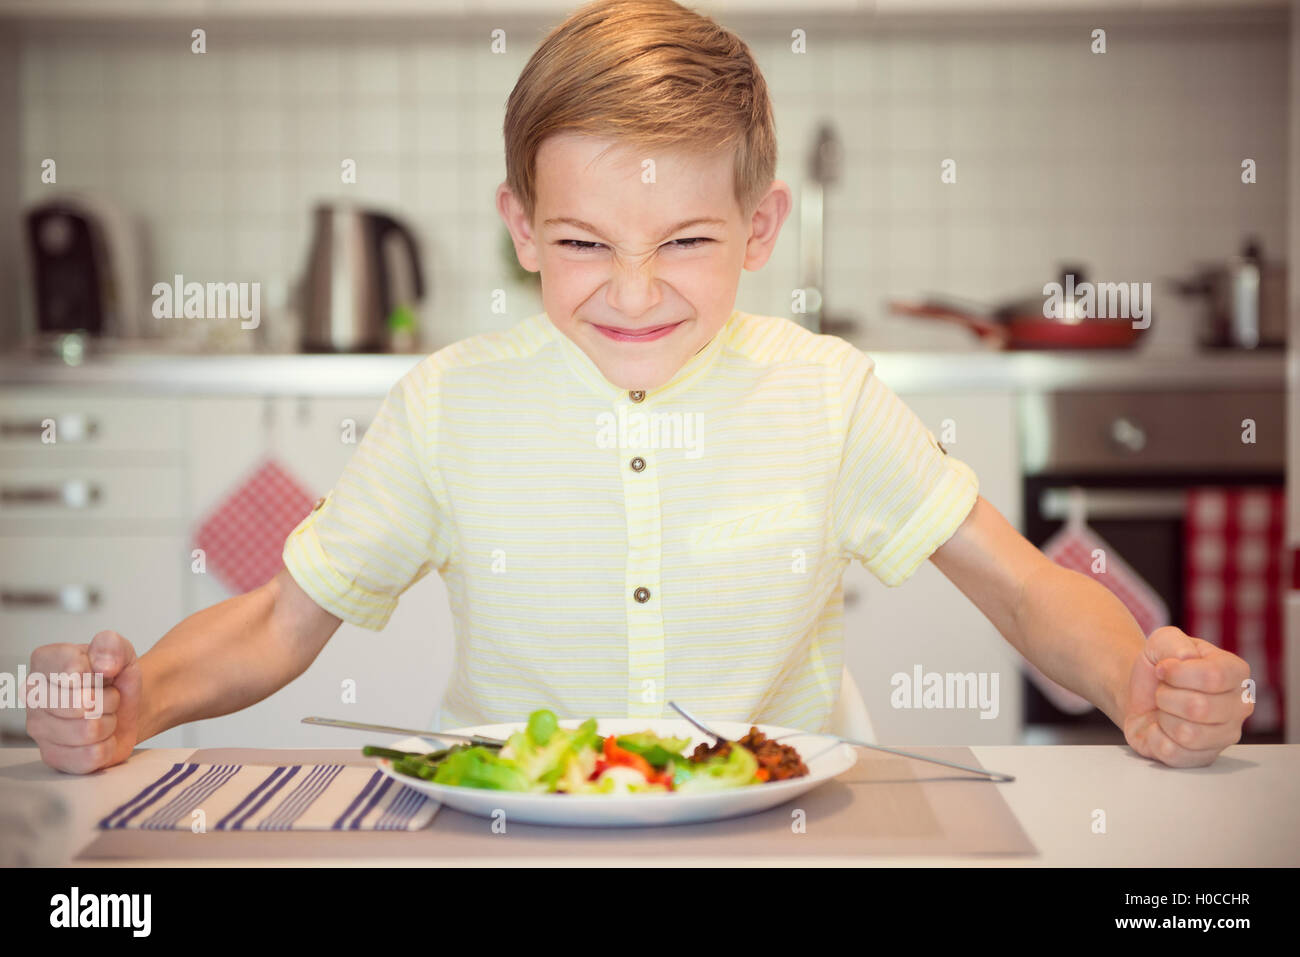 Angry hungry boy child banging his fist on the table Stock Photo